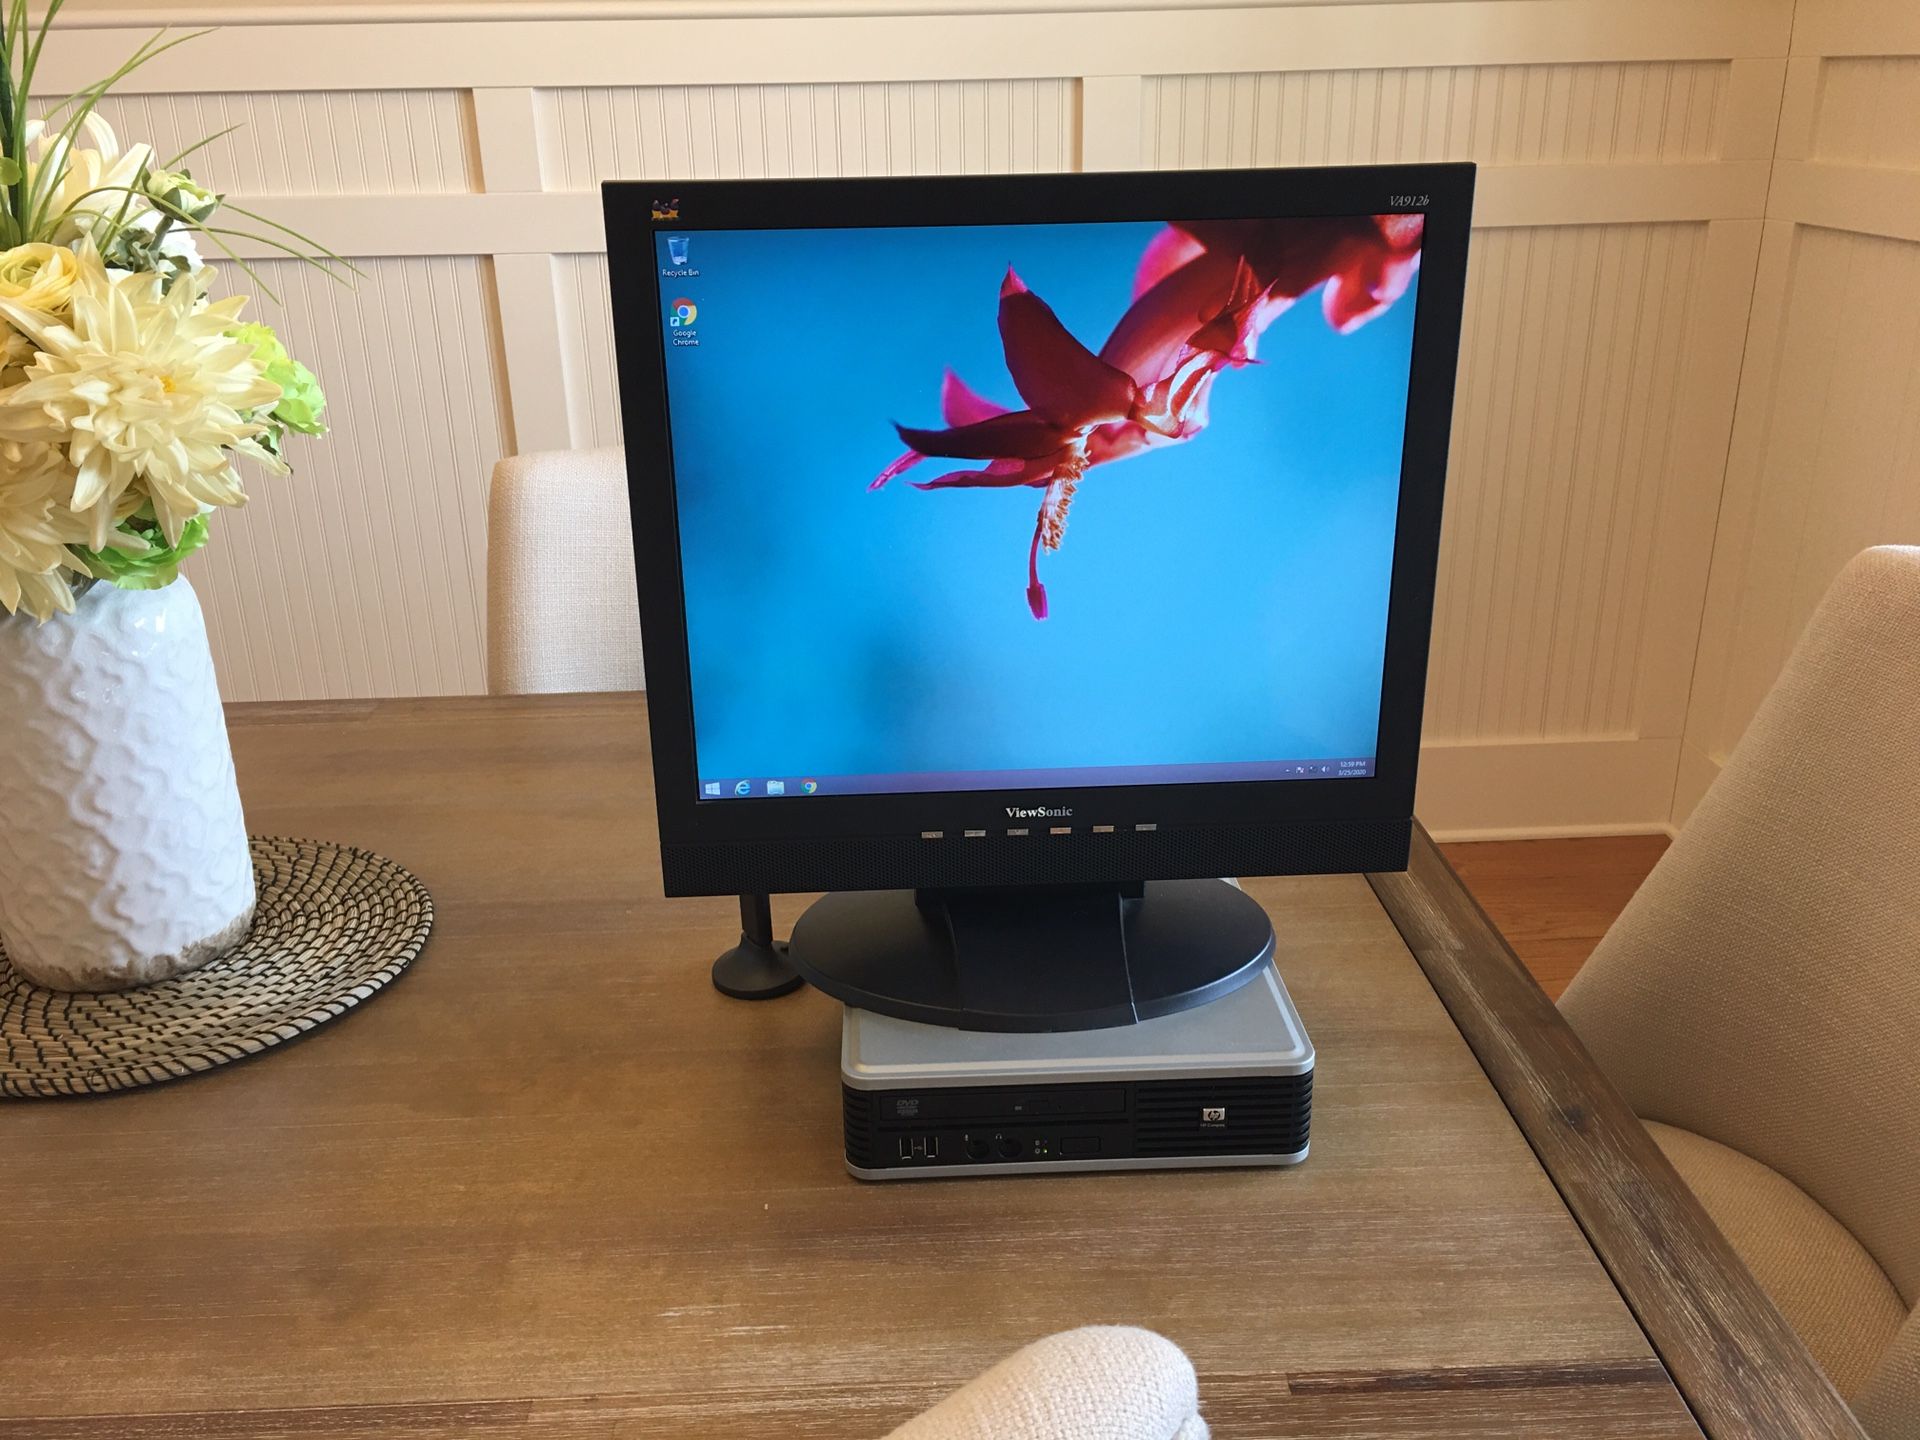 Desktop computer with WiFi, LCD, and speakers